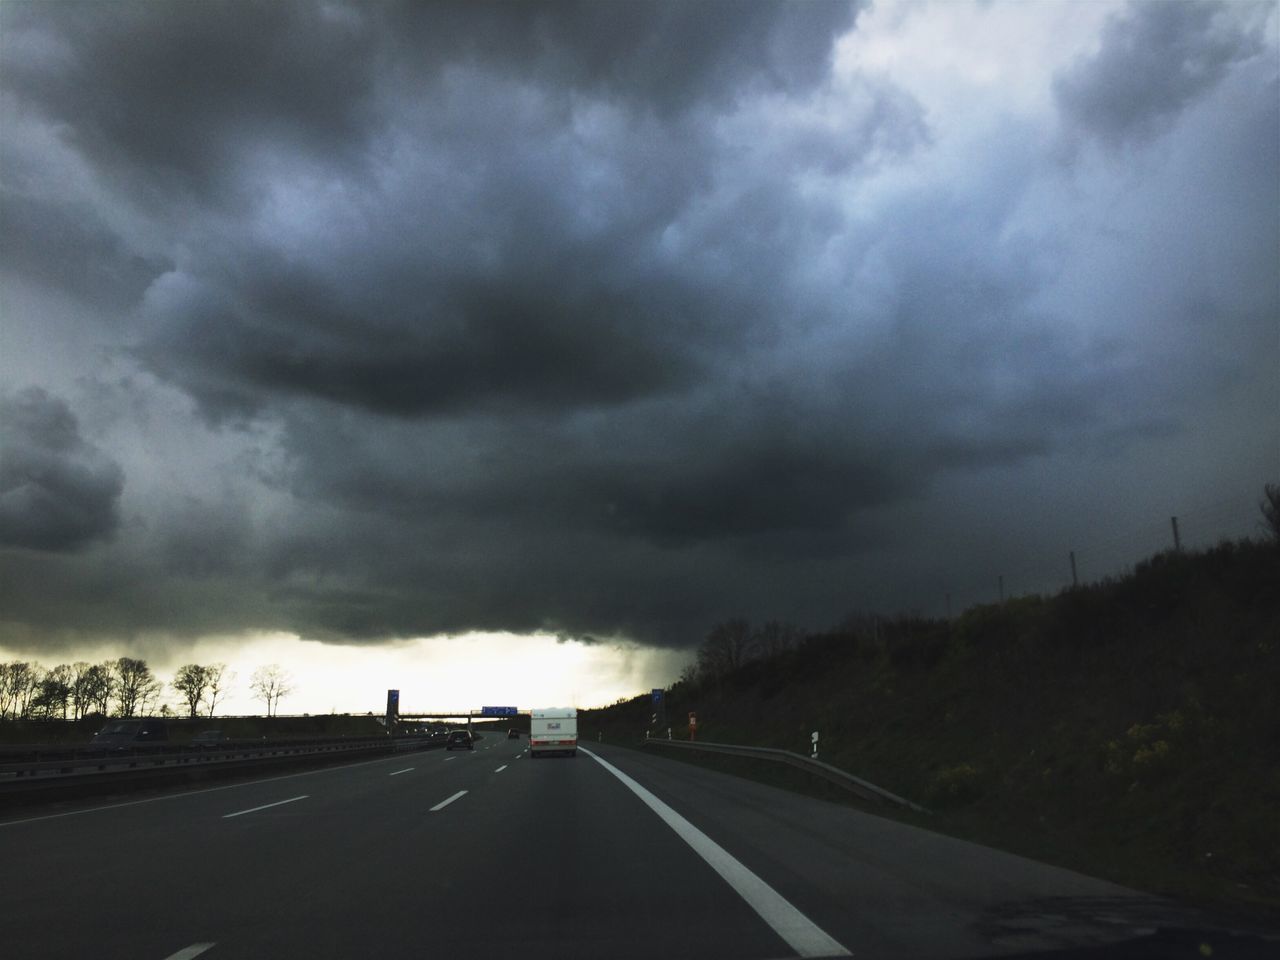 ROAD PASSING THROUGH STORM CLOUDS OVER DRAMATIC SKY